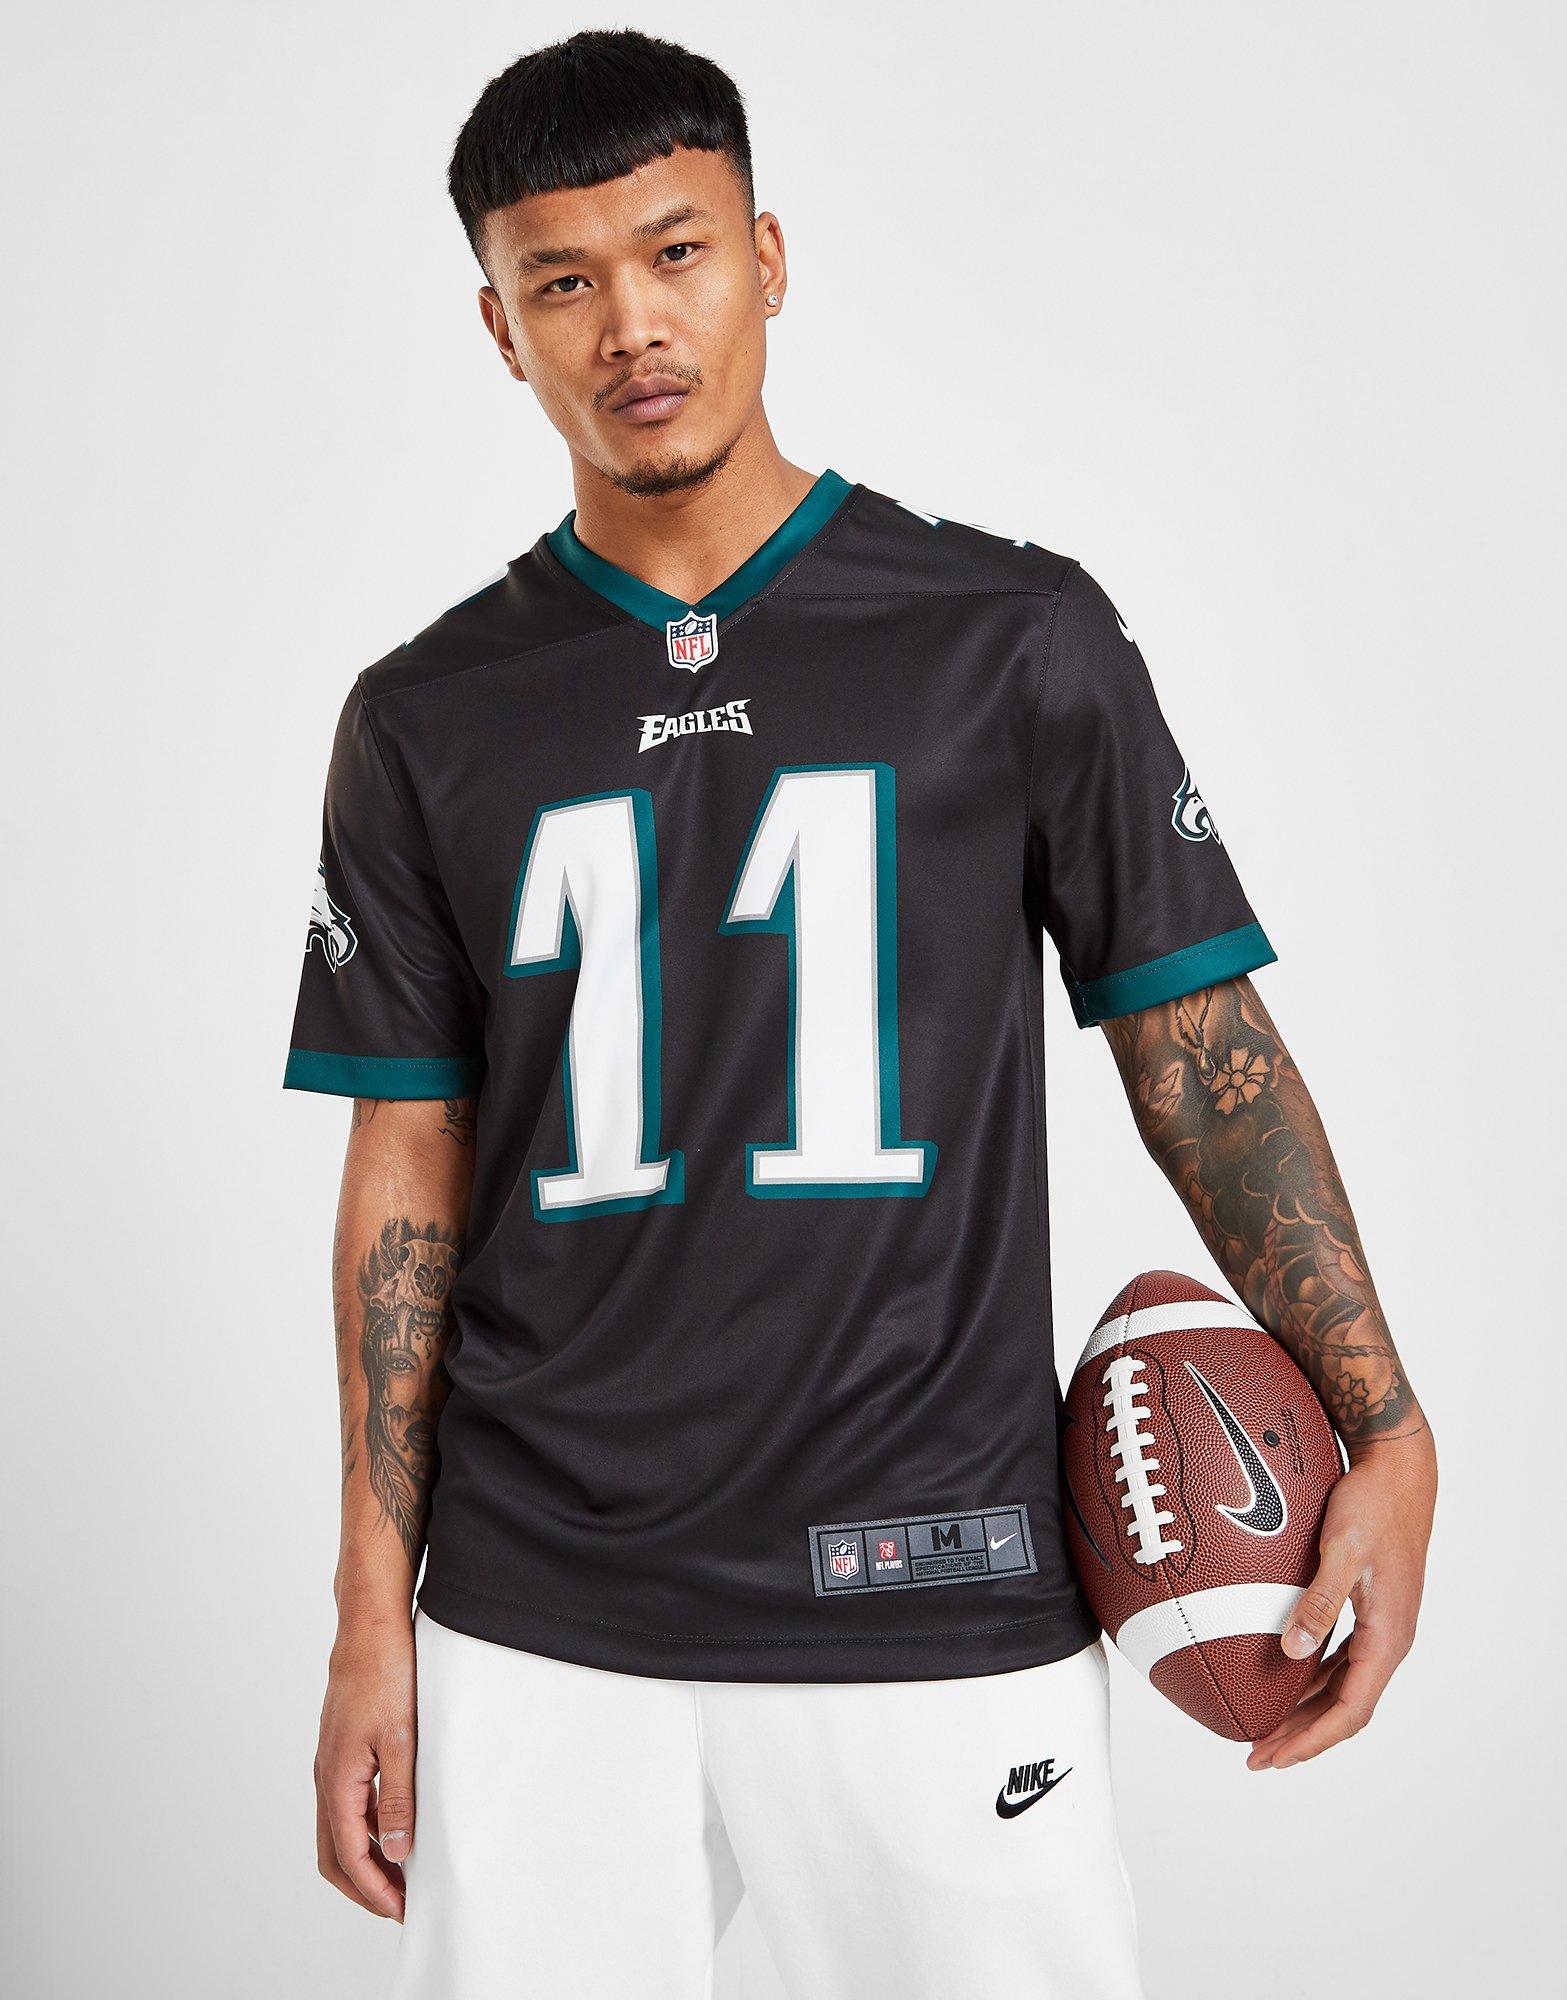 eagles jersey 11